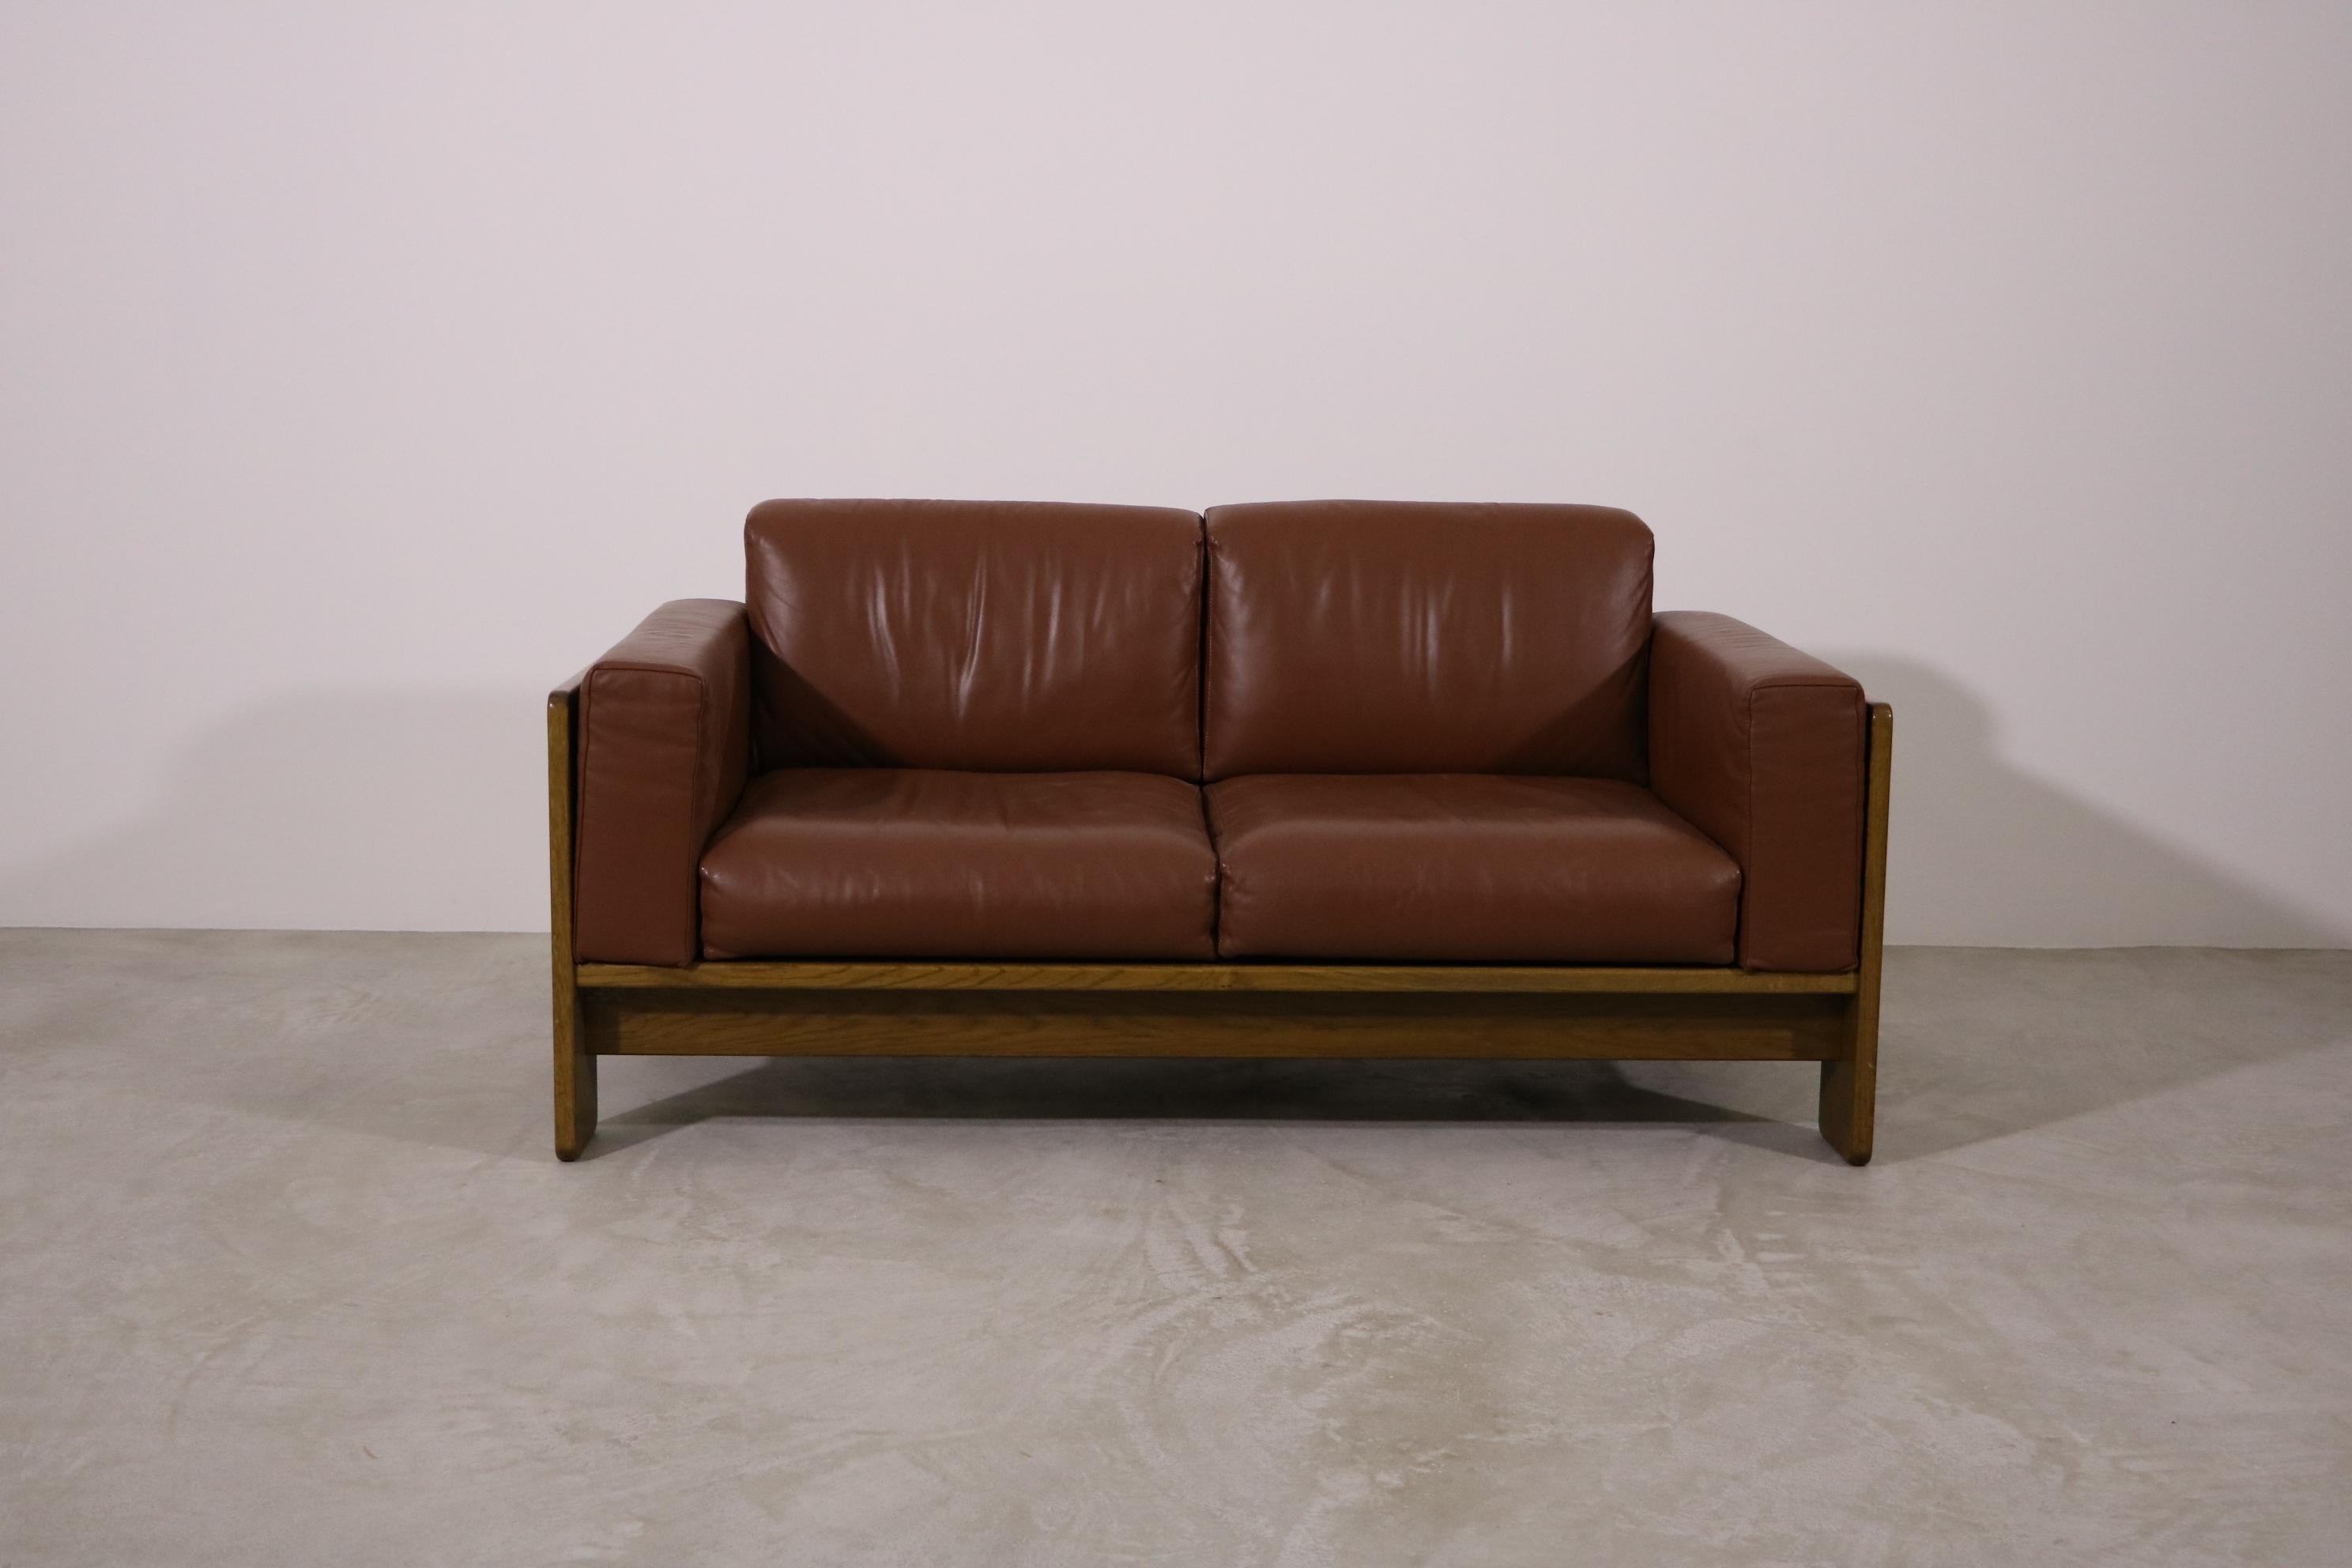 Knoll International 2-seater sofa model 'Bastiano' Tobia Scarpa leather cognac

A classic and chic two-seater sofa from the Bastiano series, designed by the iconic Italian designer duo Afra & Tobia Scarpa for Knoll International.

Frame wood oak